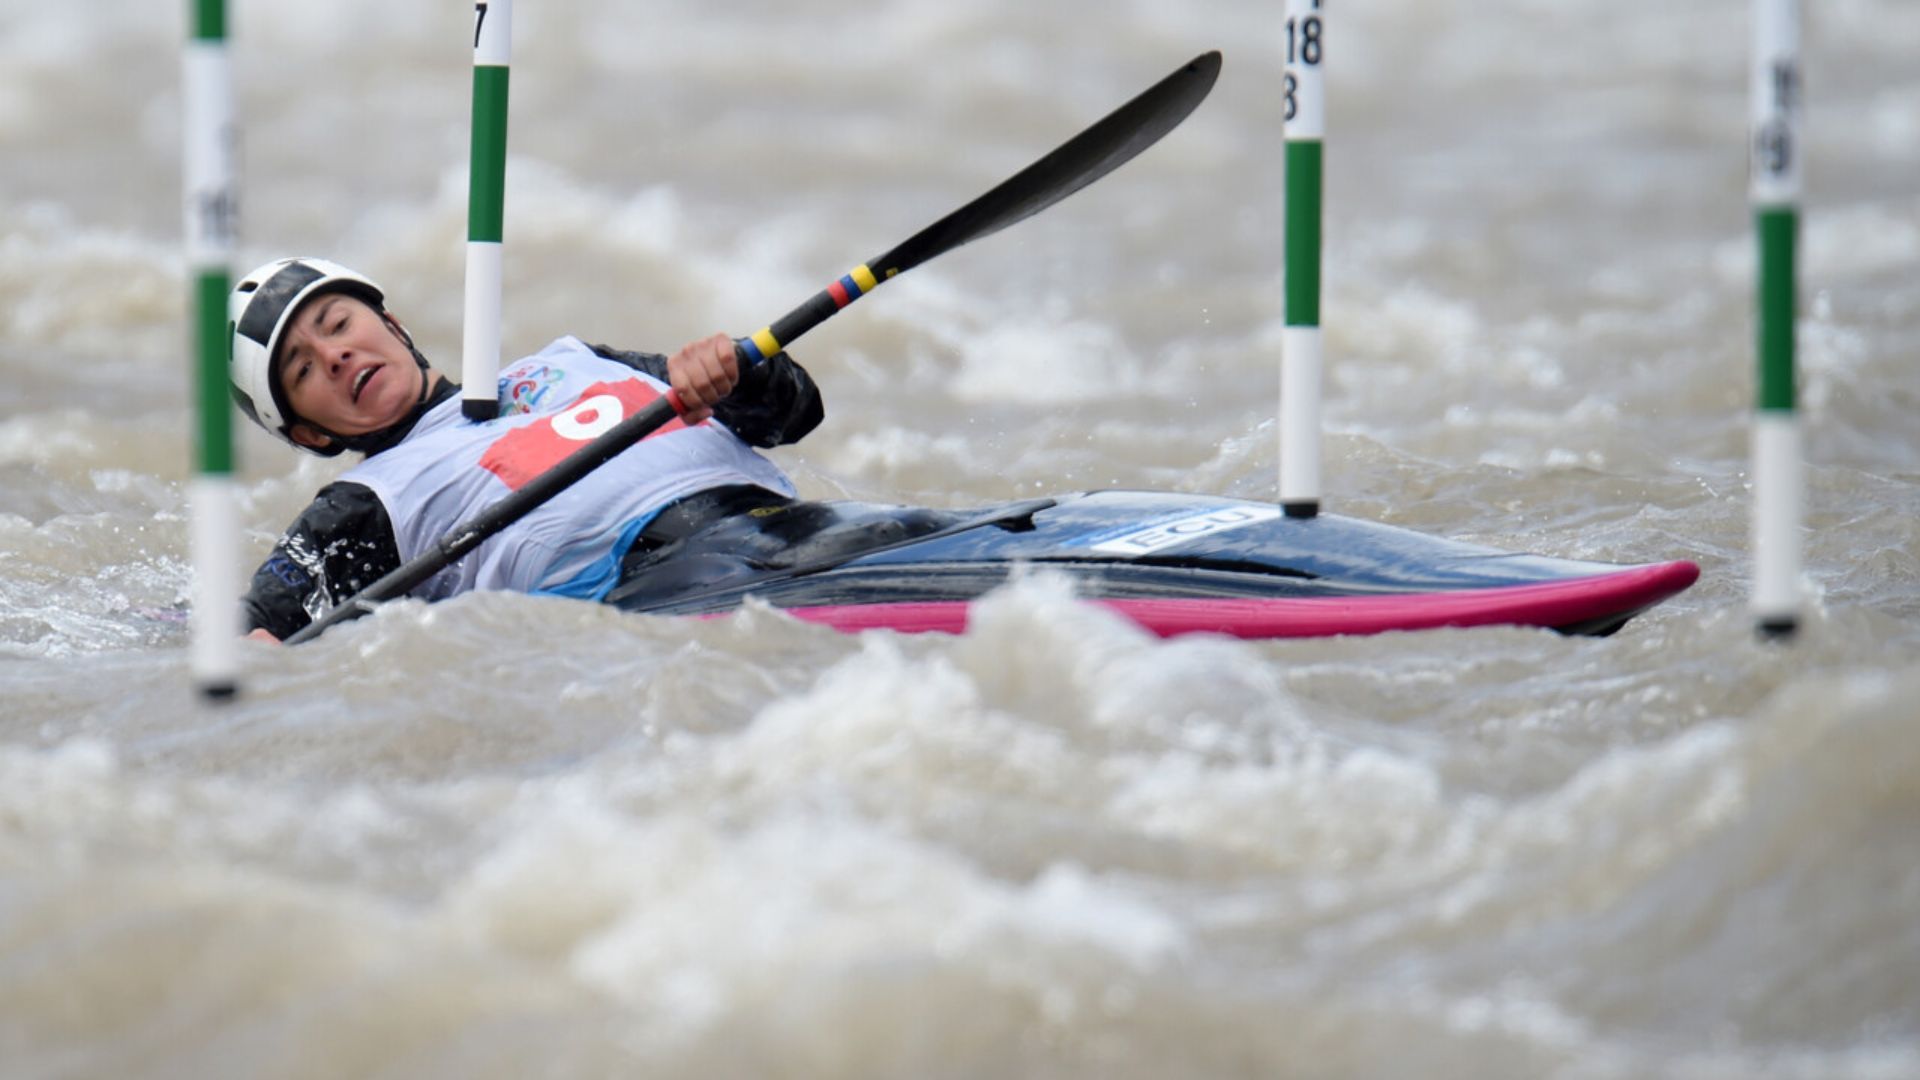 Brazil and the United States Dominate Pan American Canoe Slalom